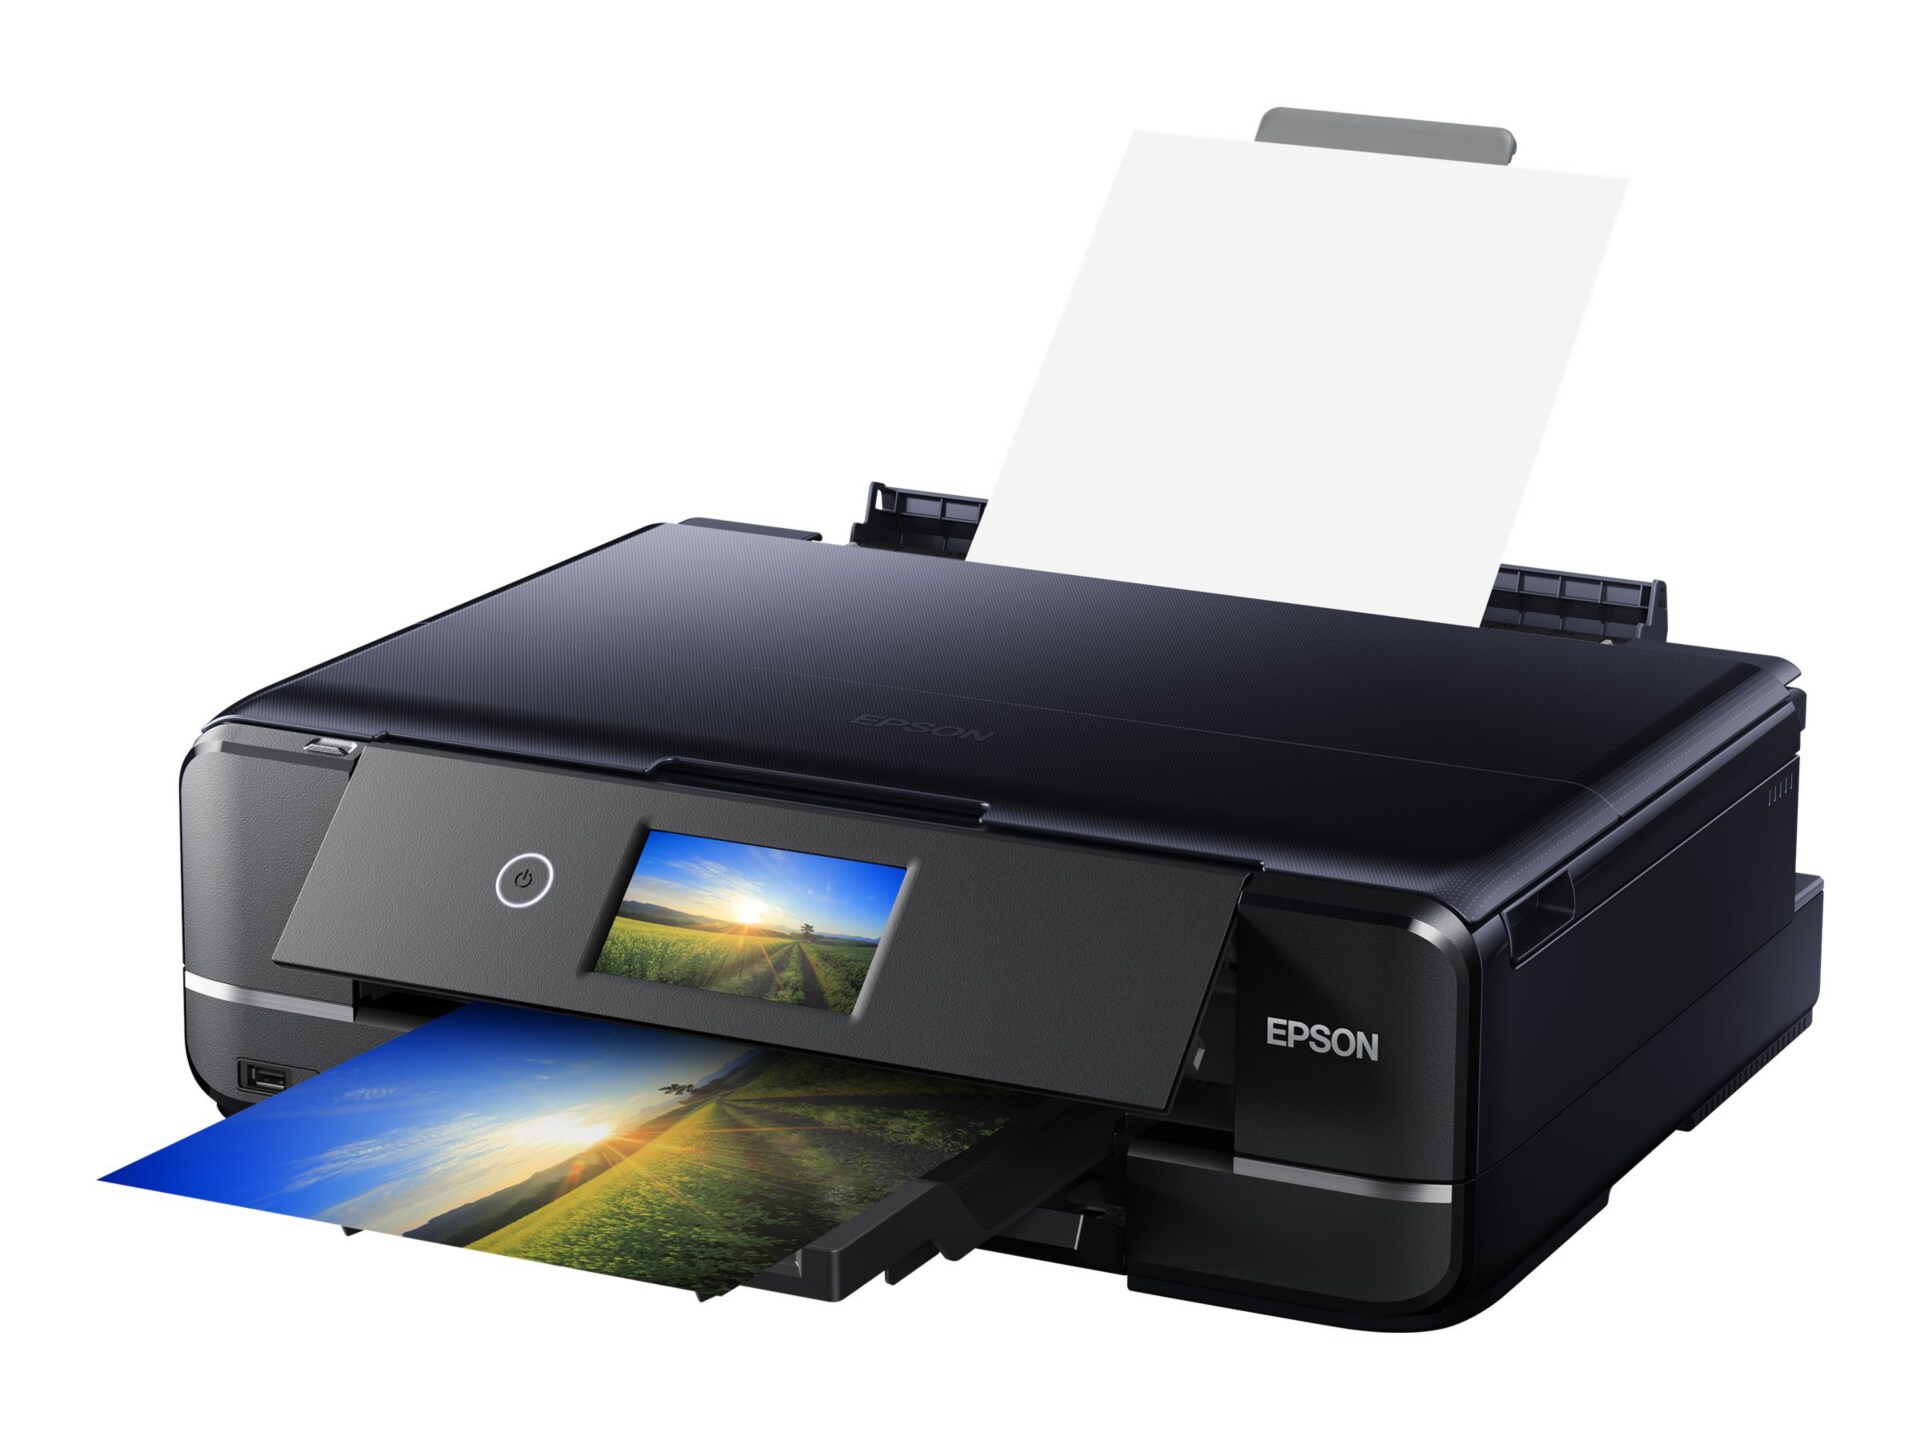 Epson Expression Photo XP-970 Small-in-One - multifunction printer - color